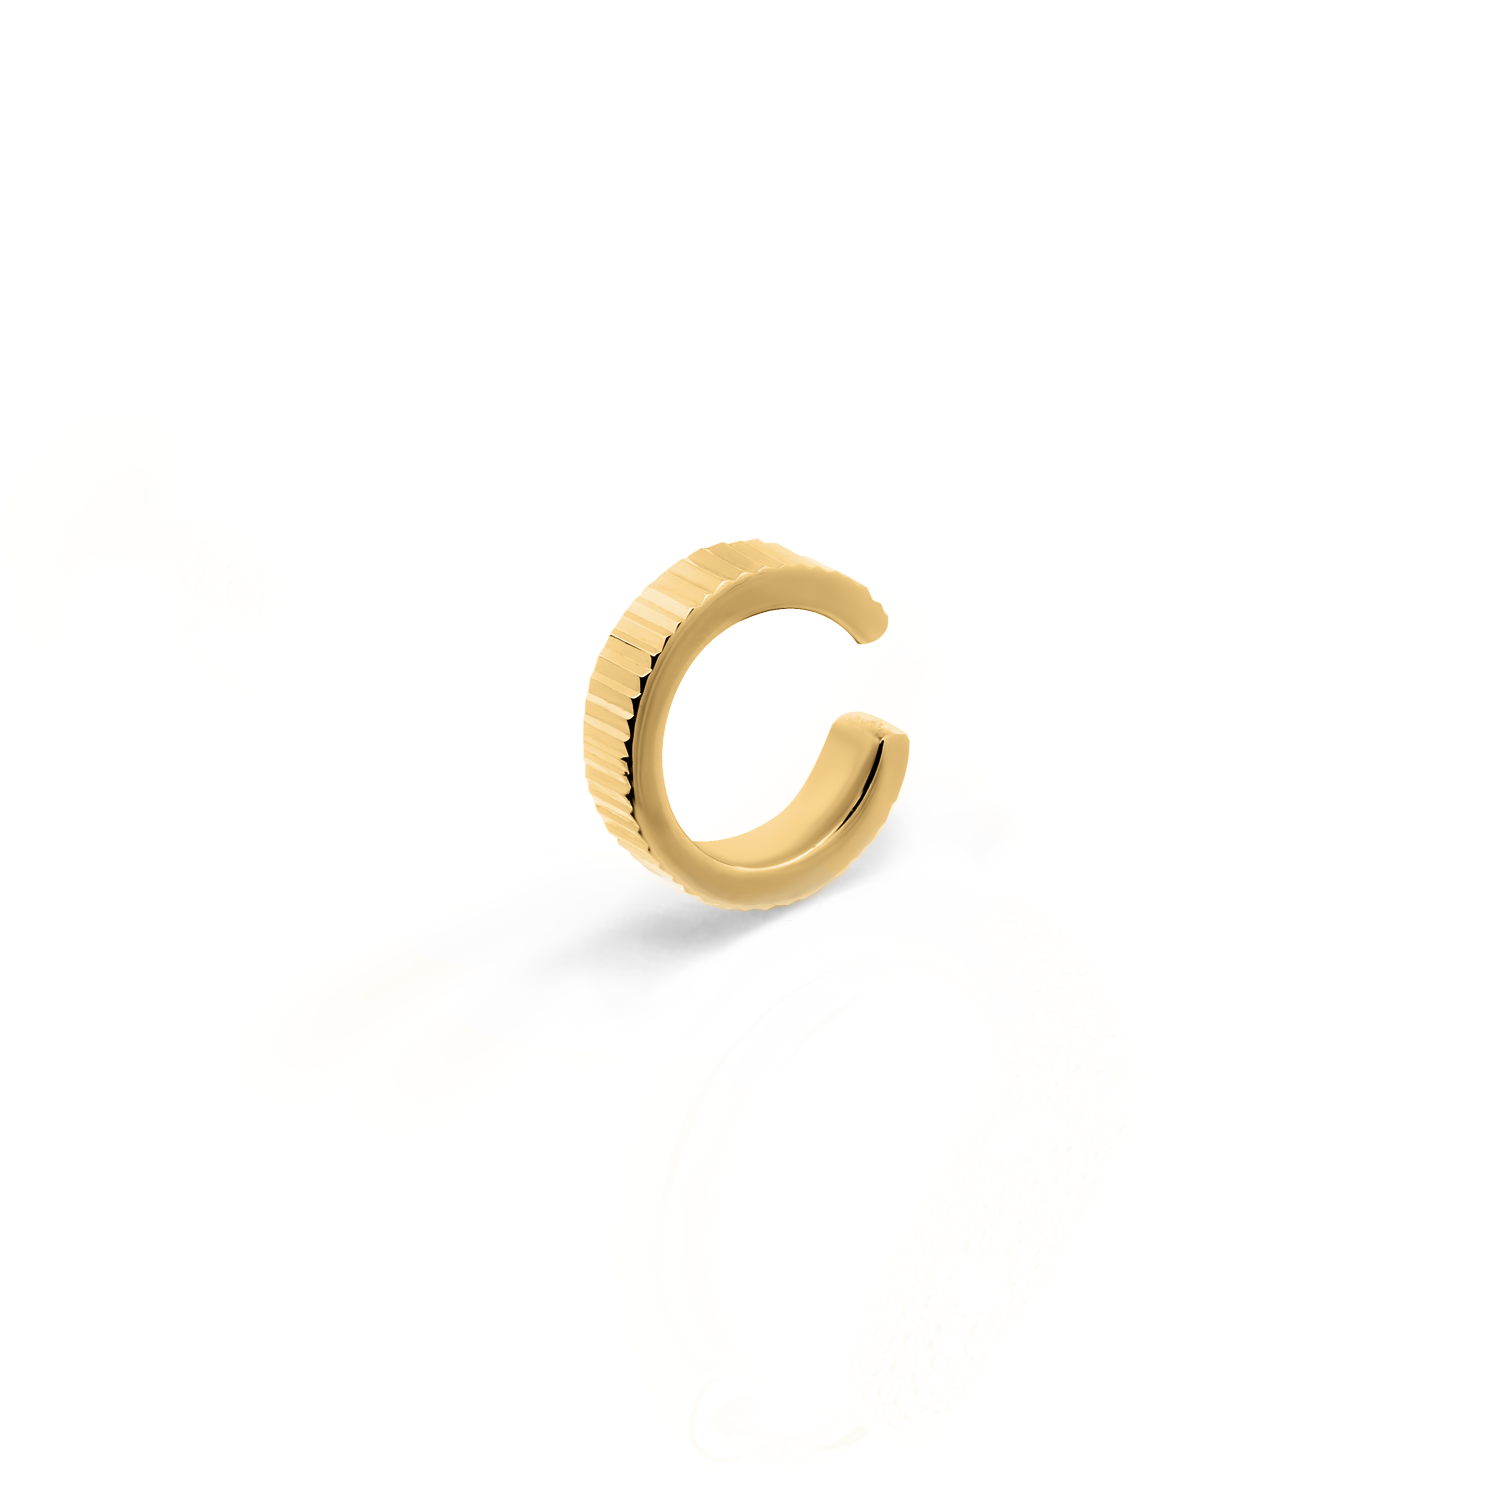 Elegant and statement textured ear cuff in gold.